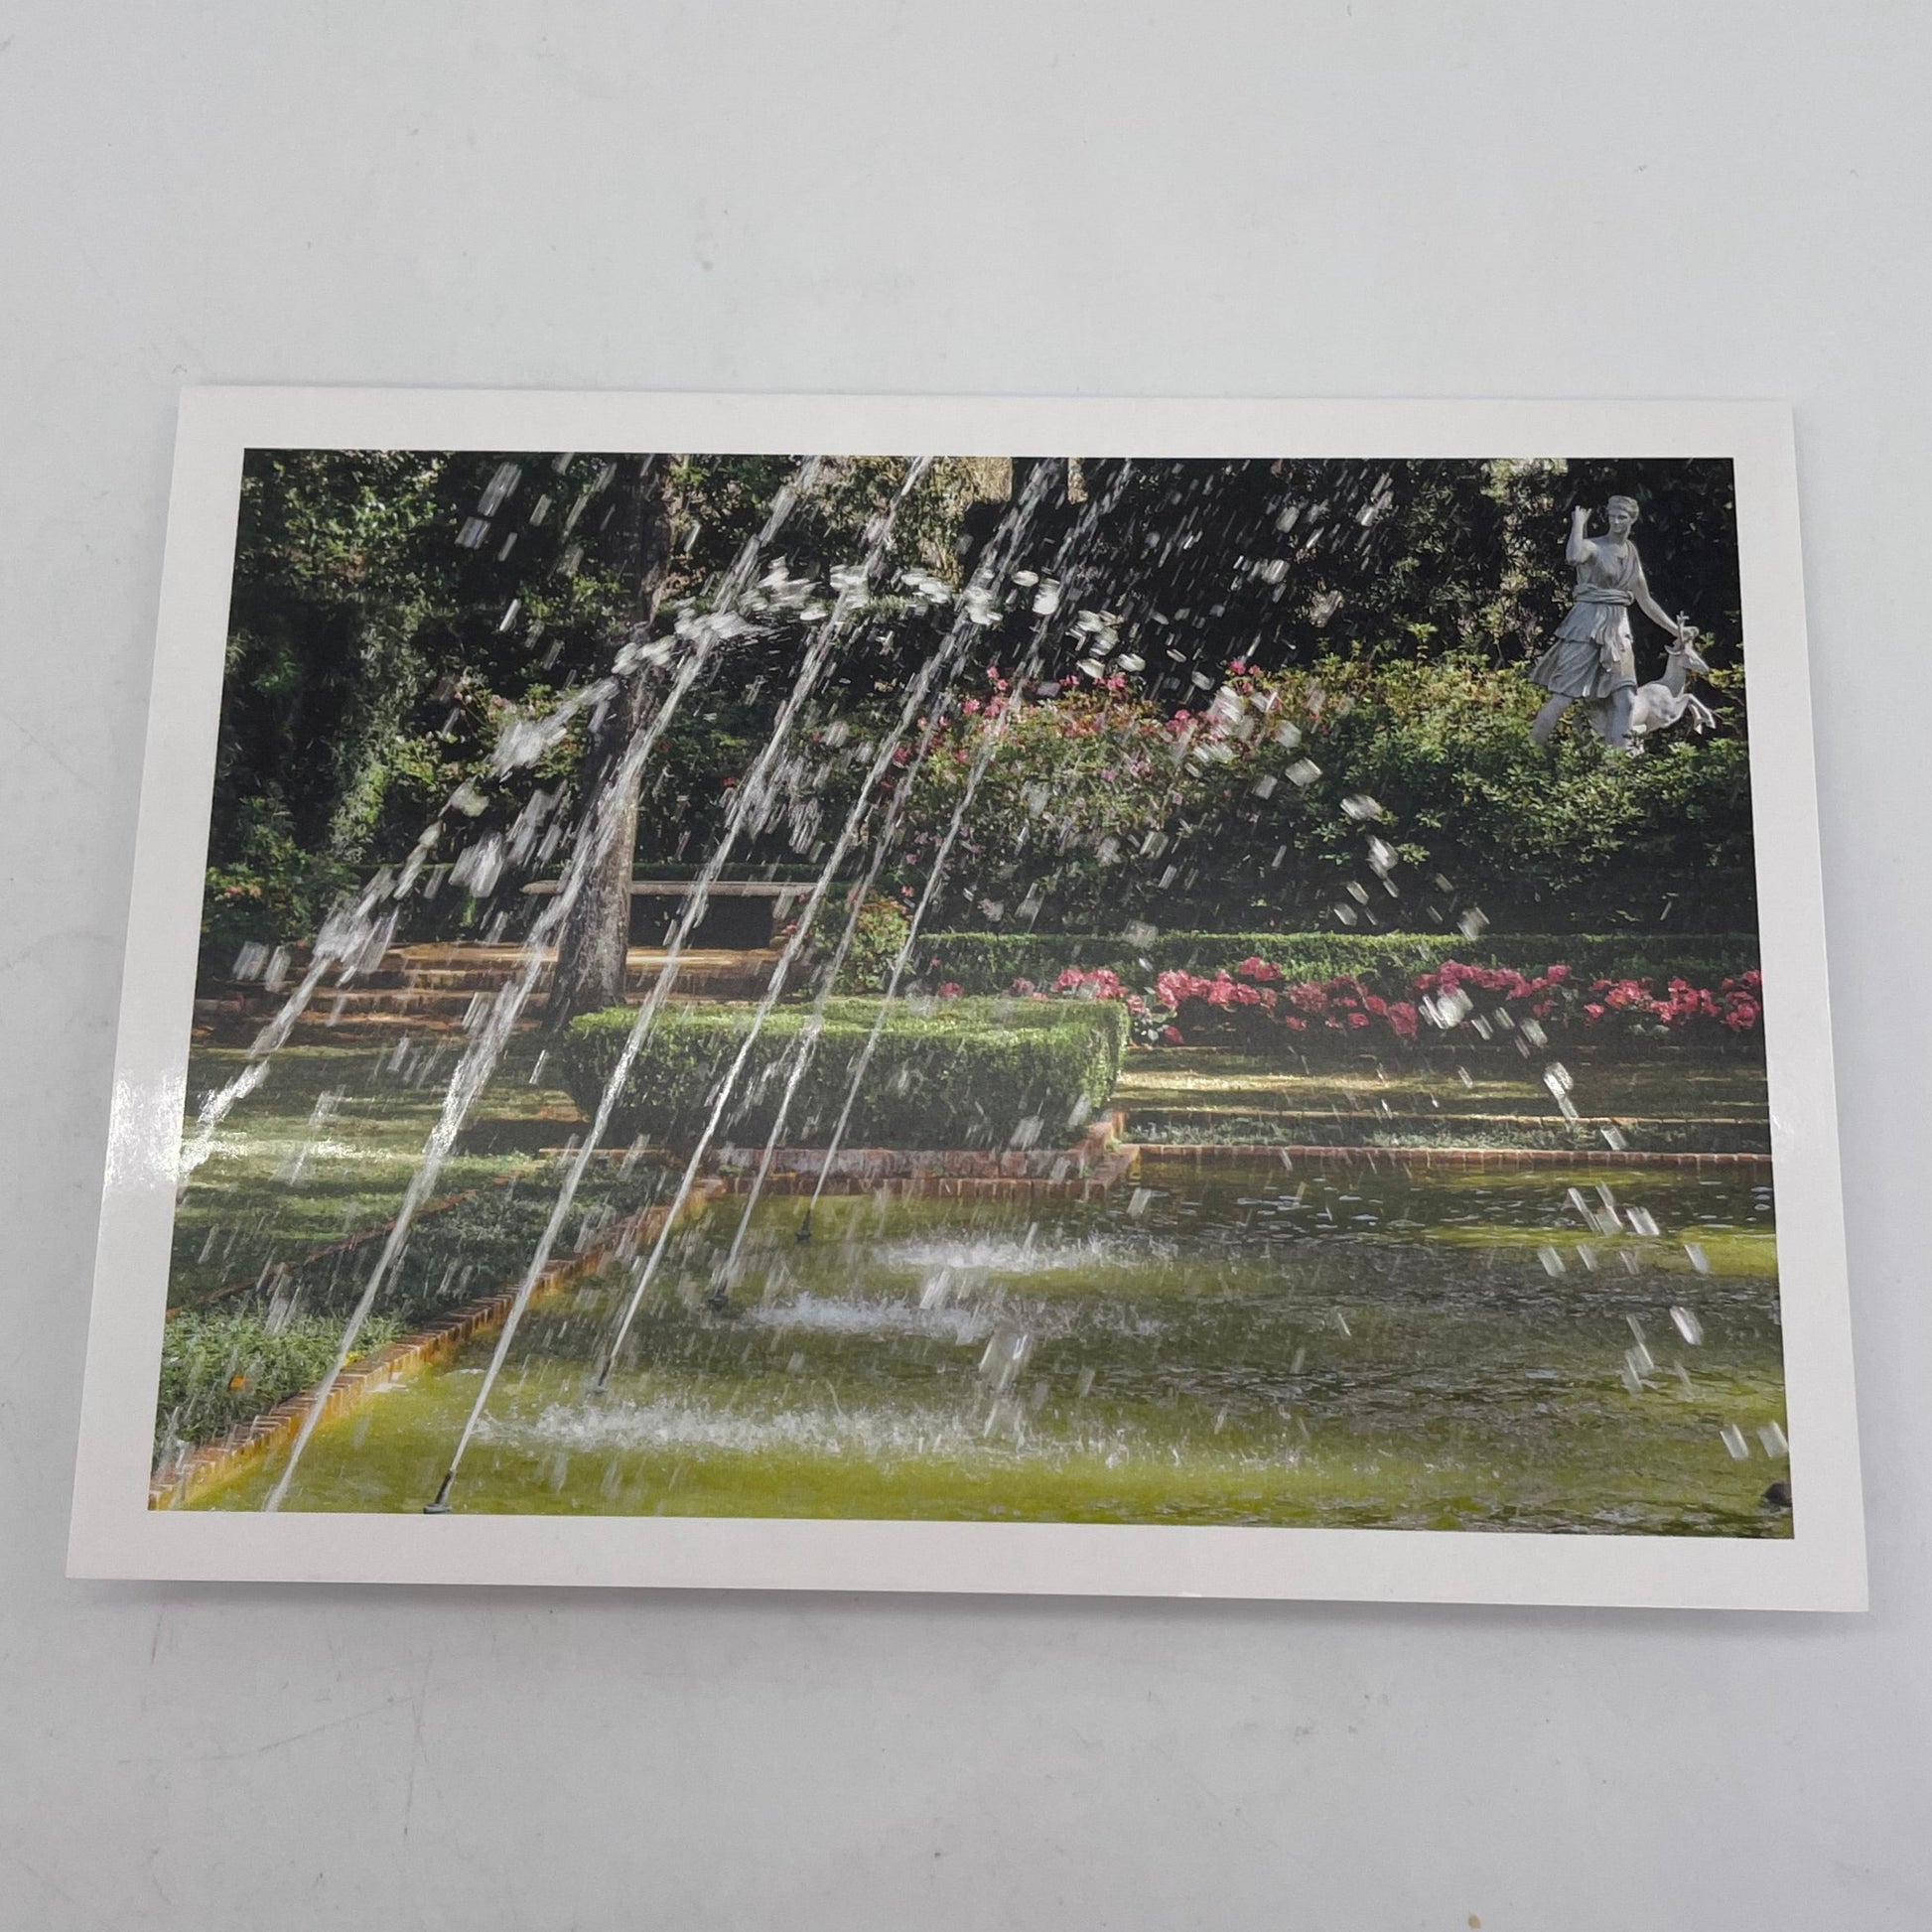 Greeting card with photograph of water and fountain with flowers and statue in the background.